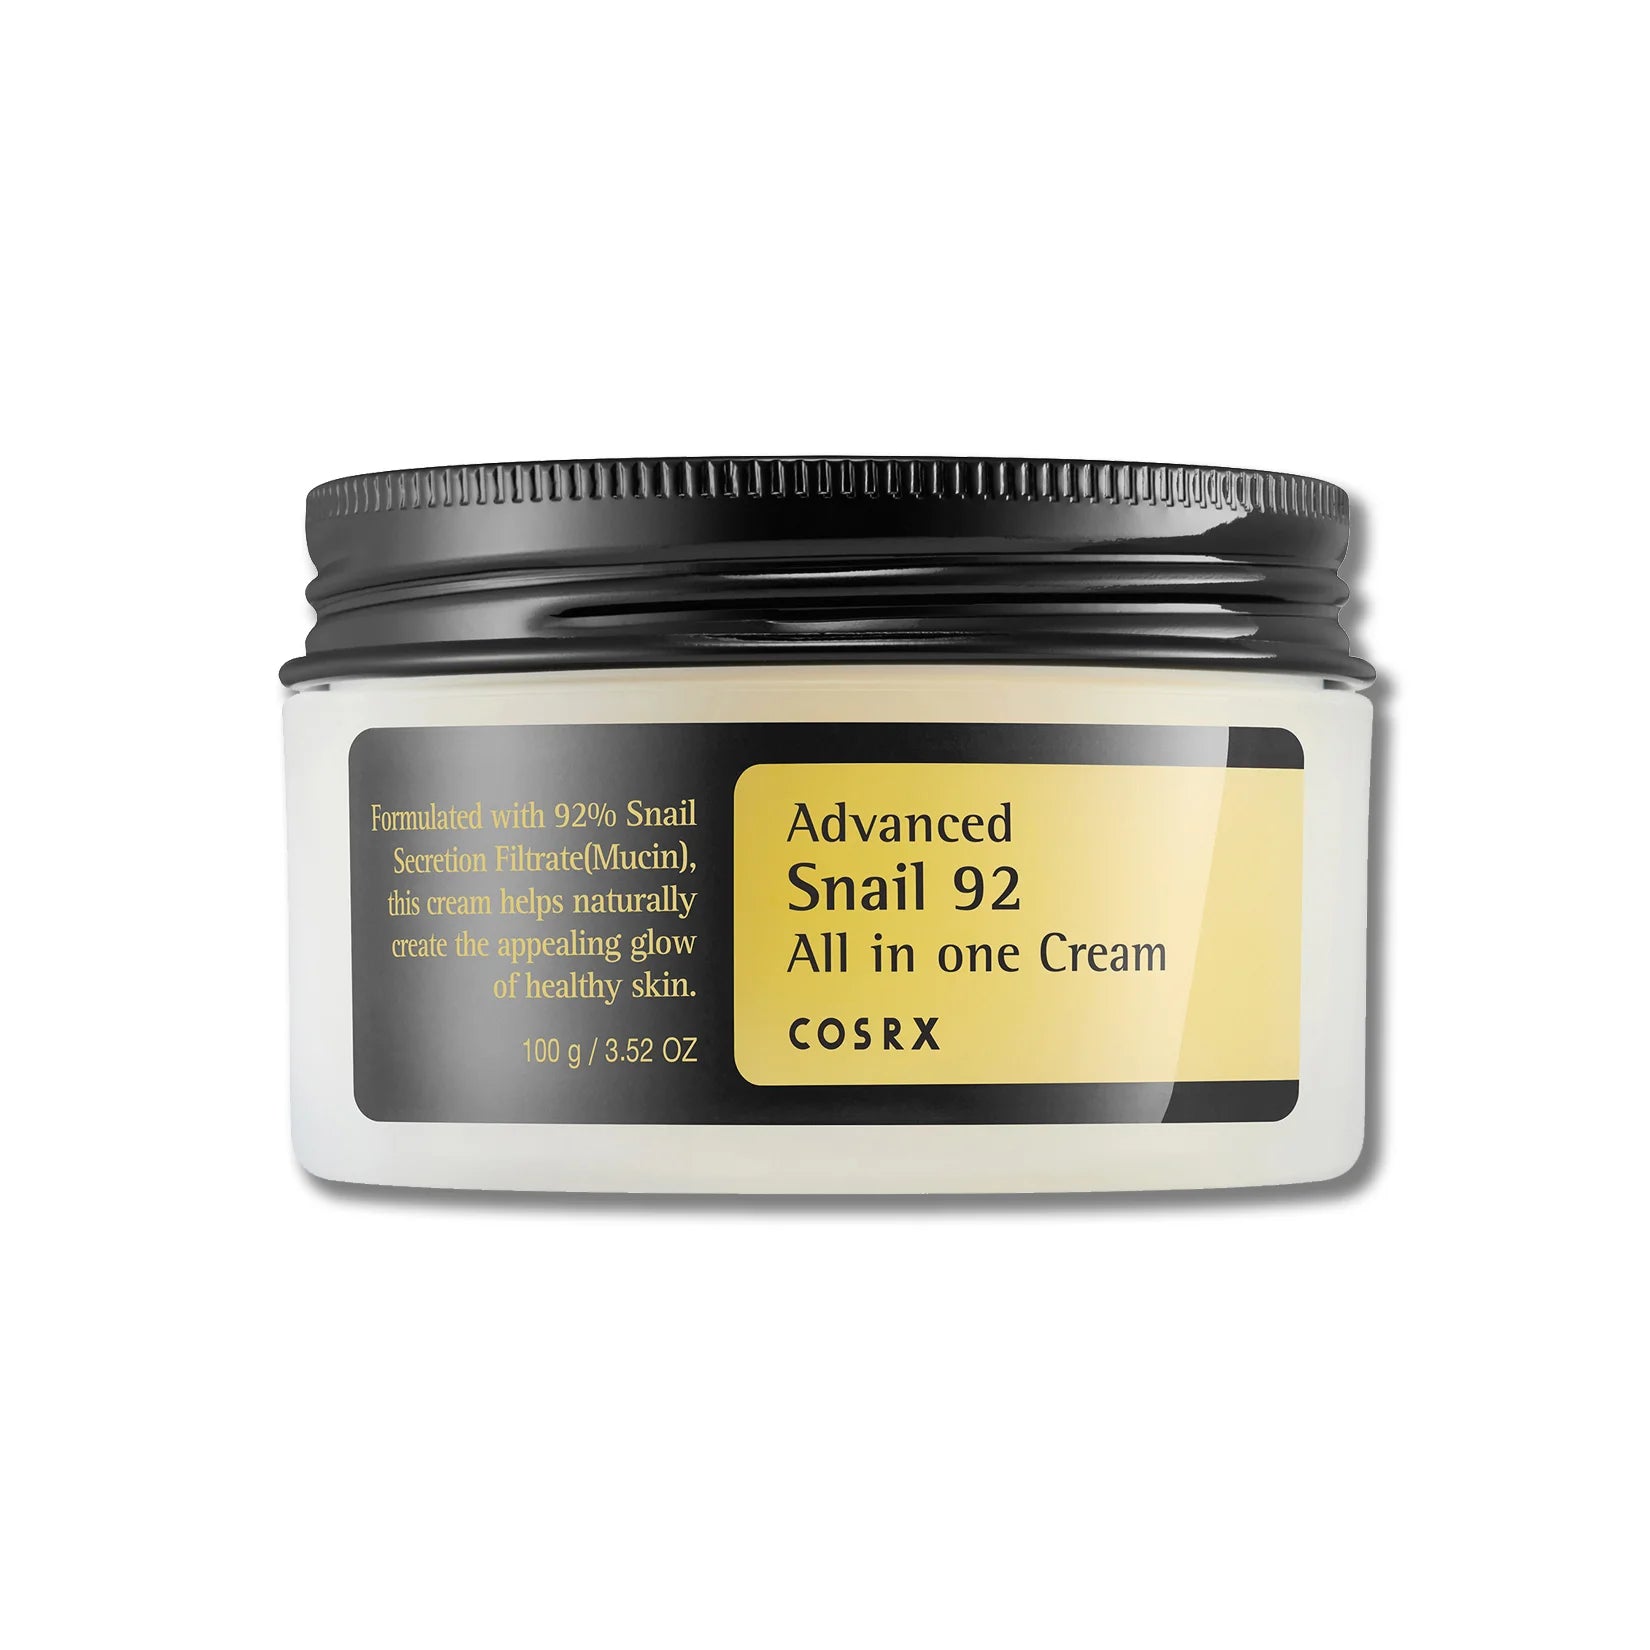 Cosrx Advanced Snail 92 All in one Cream face moisturizer for dry oily skin anti-aging acne pimple hyper pigmentation wrinkles  K Beauty World